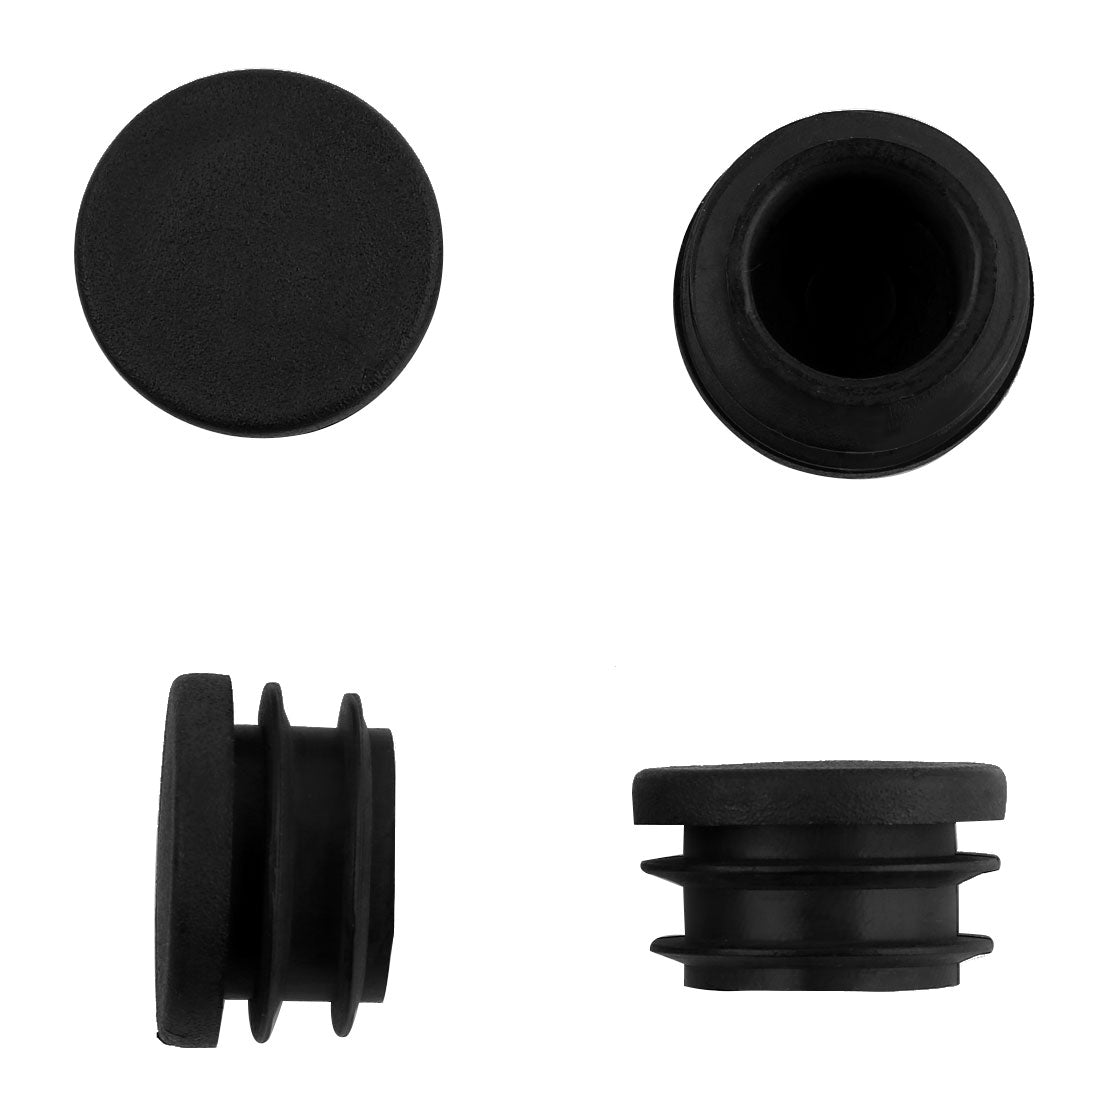 uxcell Uxcell Furniture Table Chair Legs Plastic Round Tube Pipe Insert Cap Cover Stopper Black 22mm Dia 12pcs